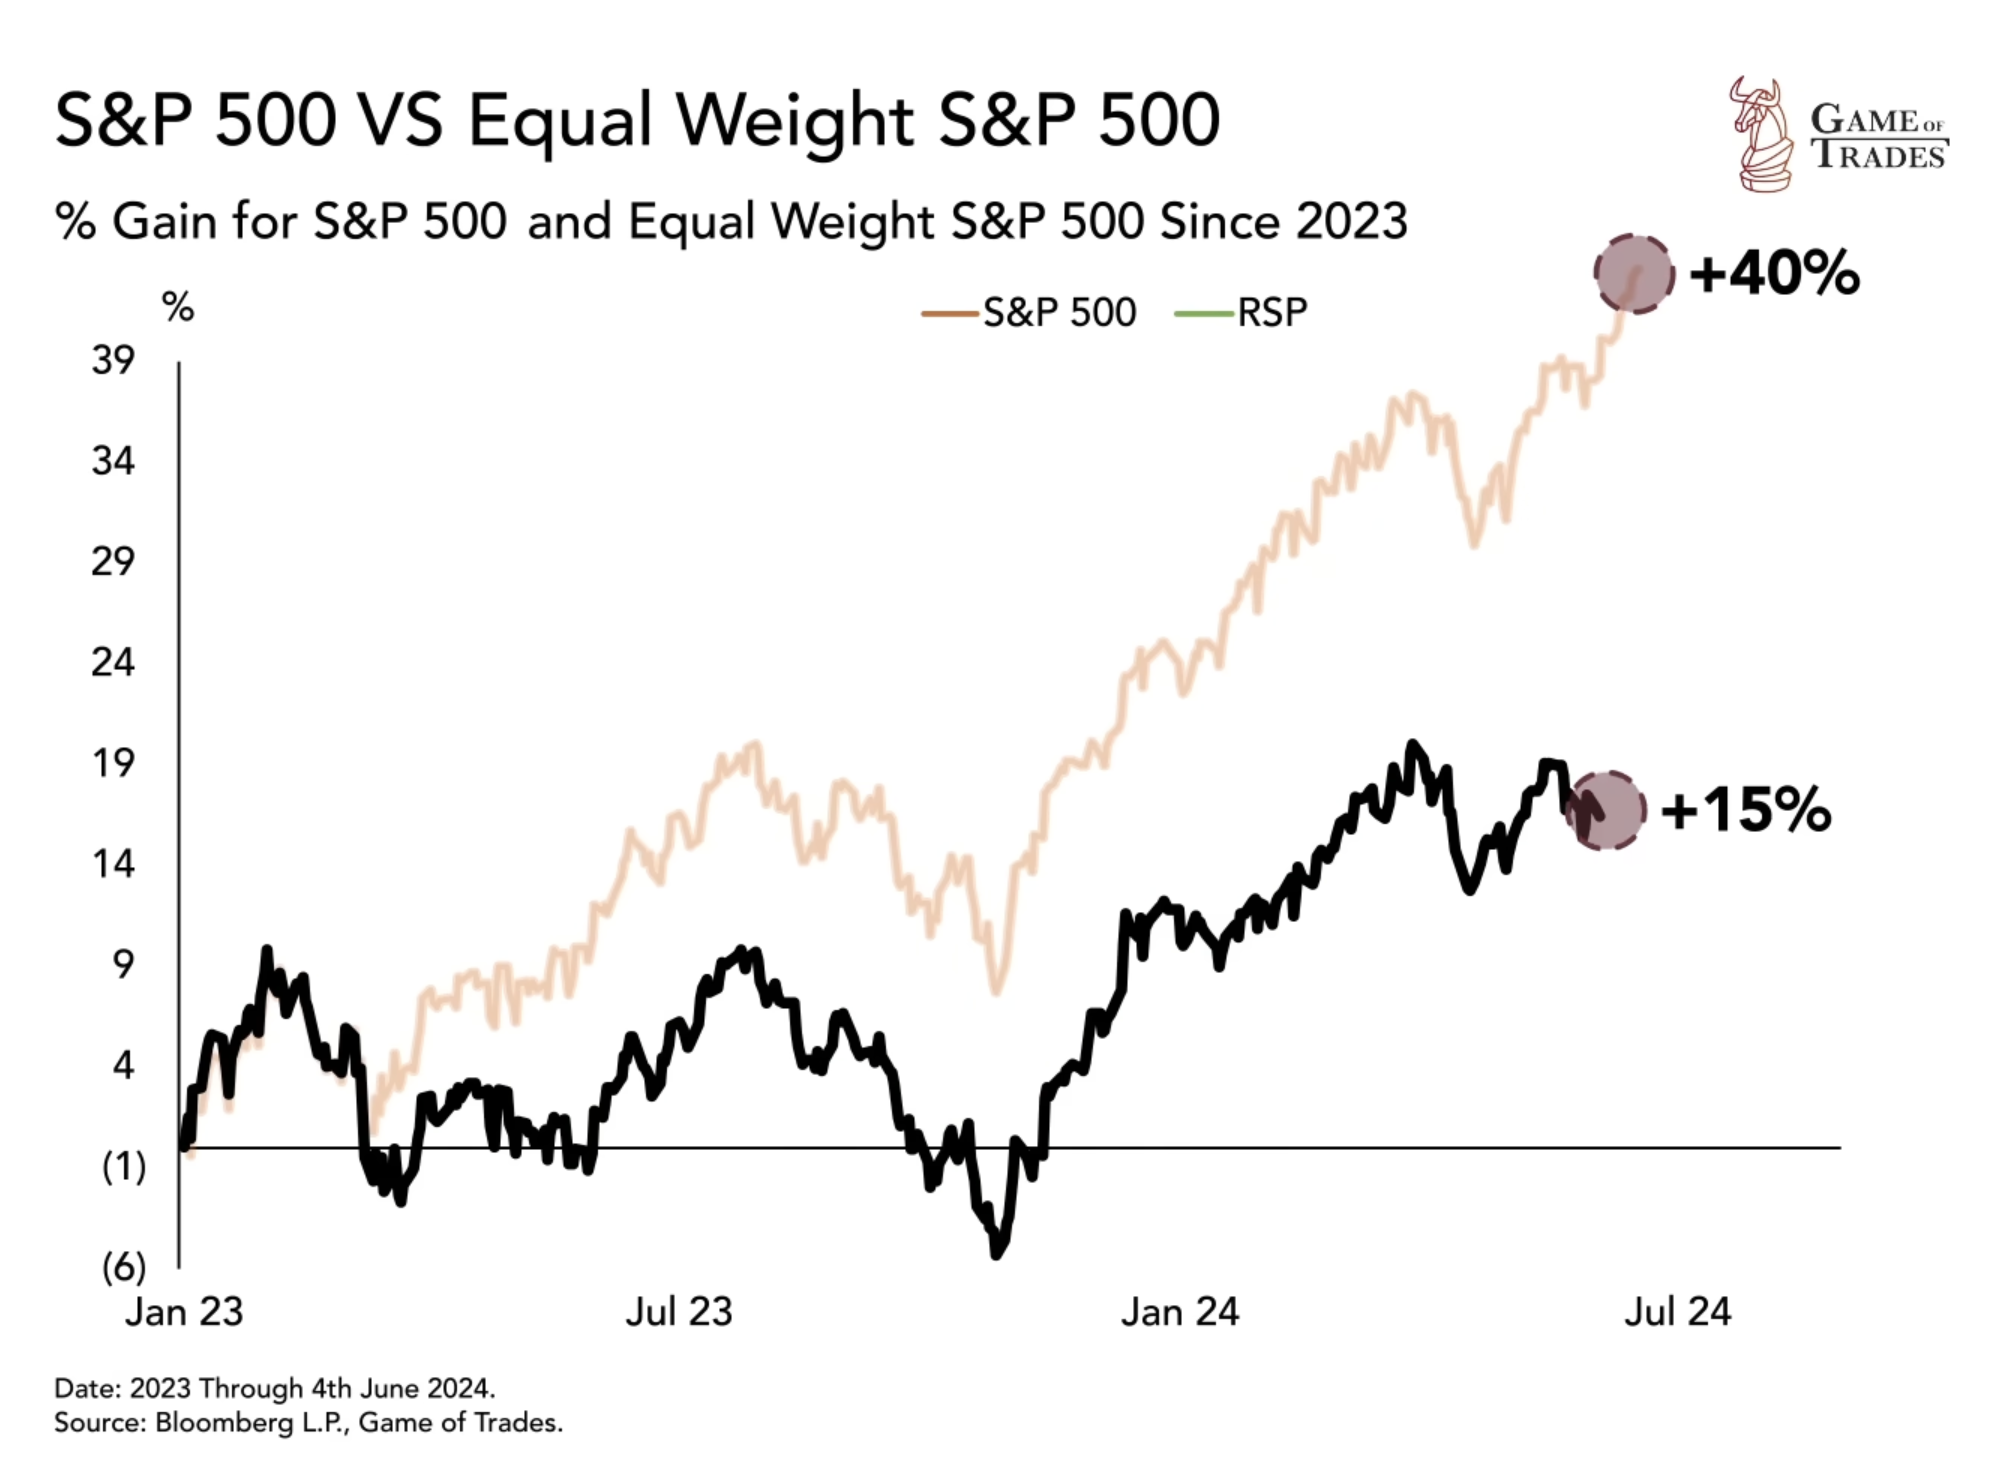 S&P 500 vs Equal weight S&P 500